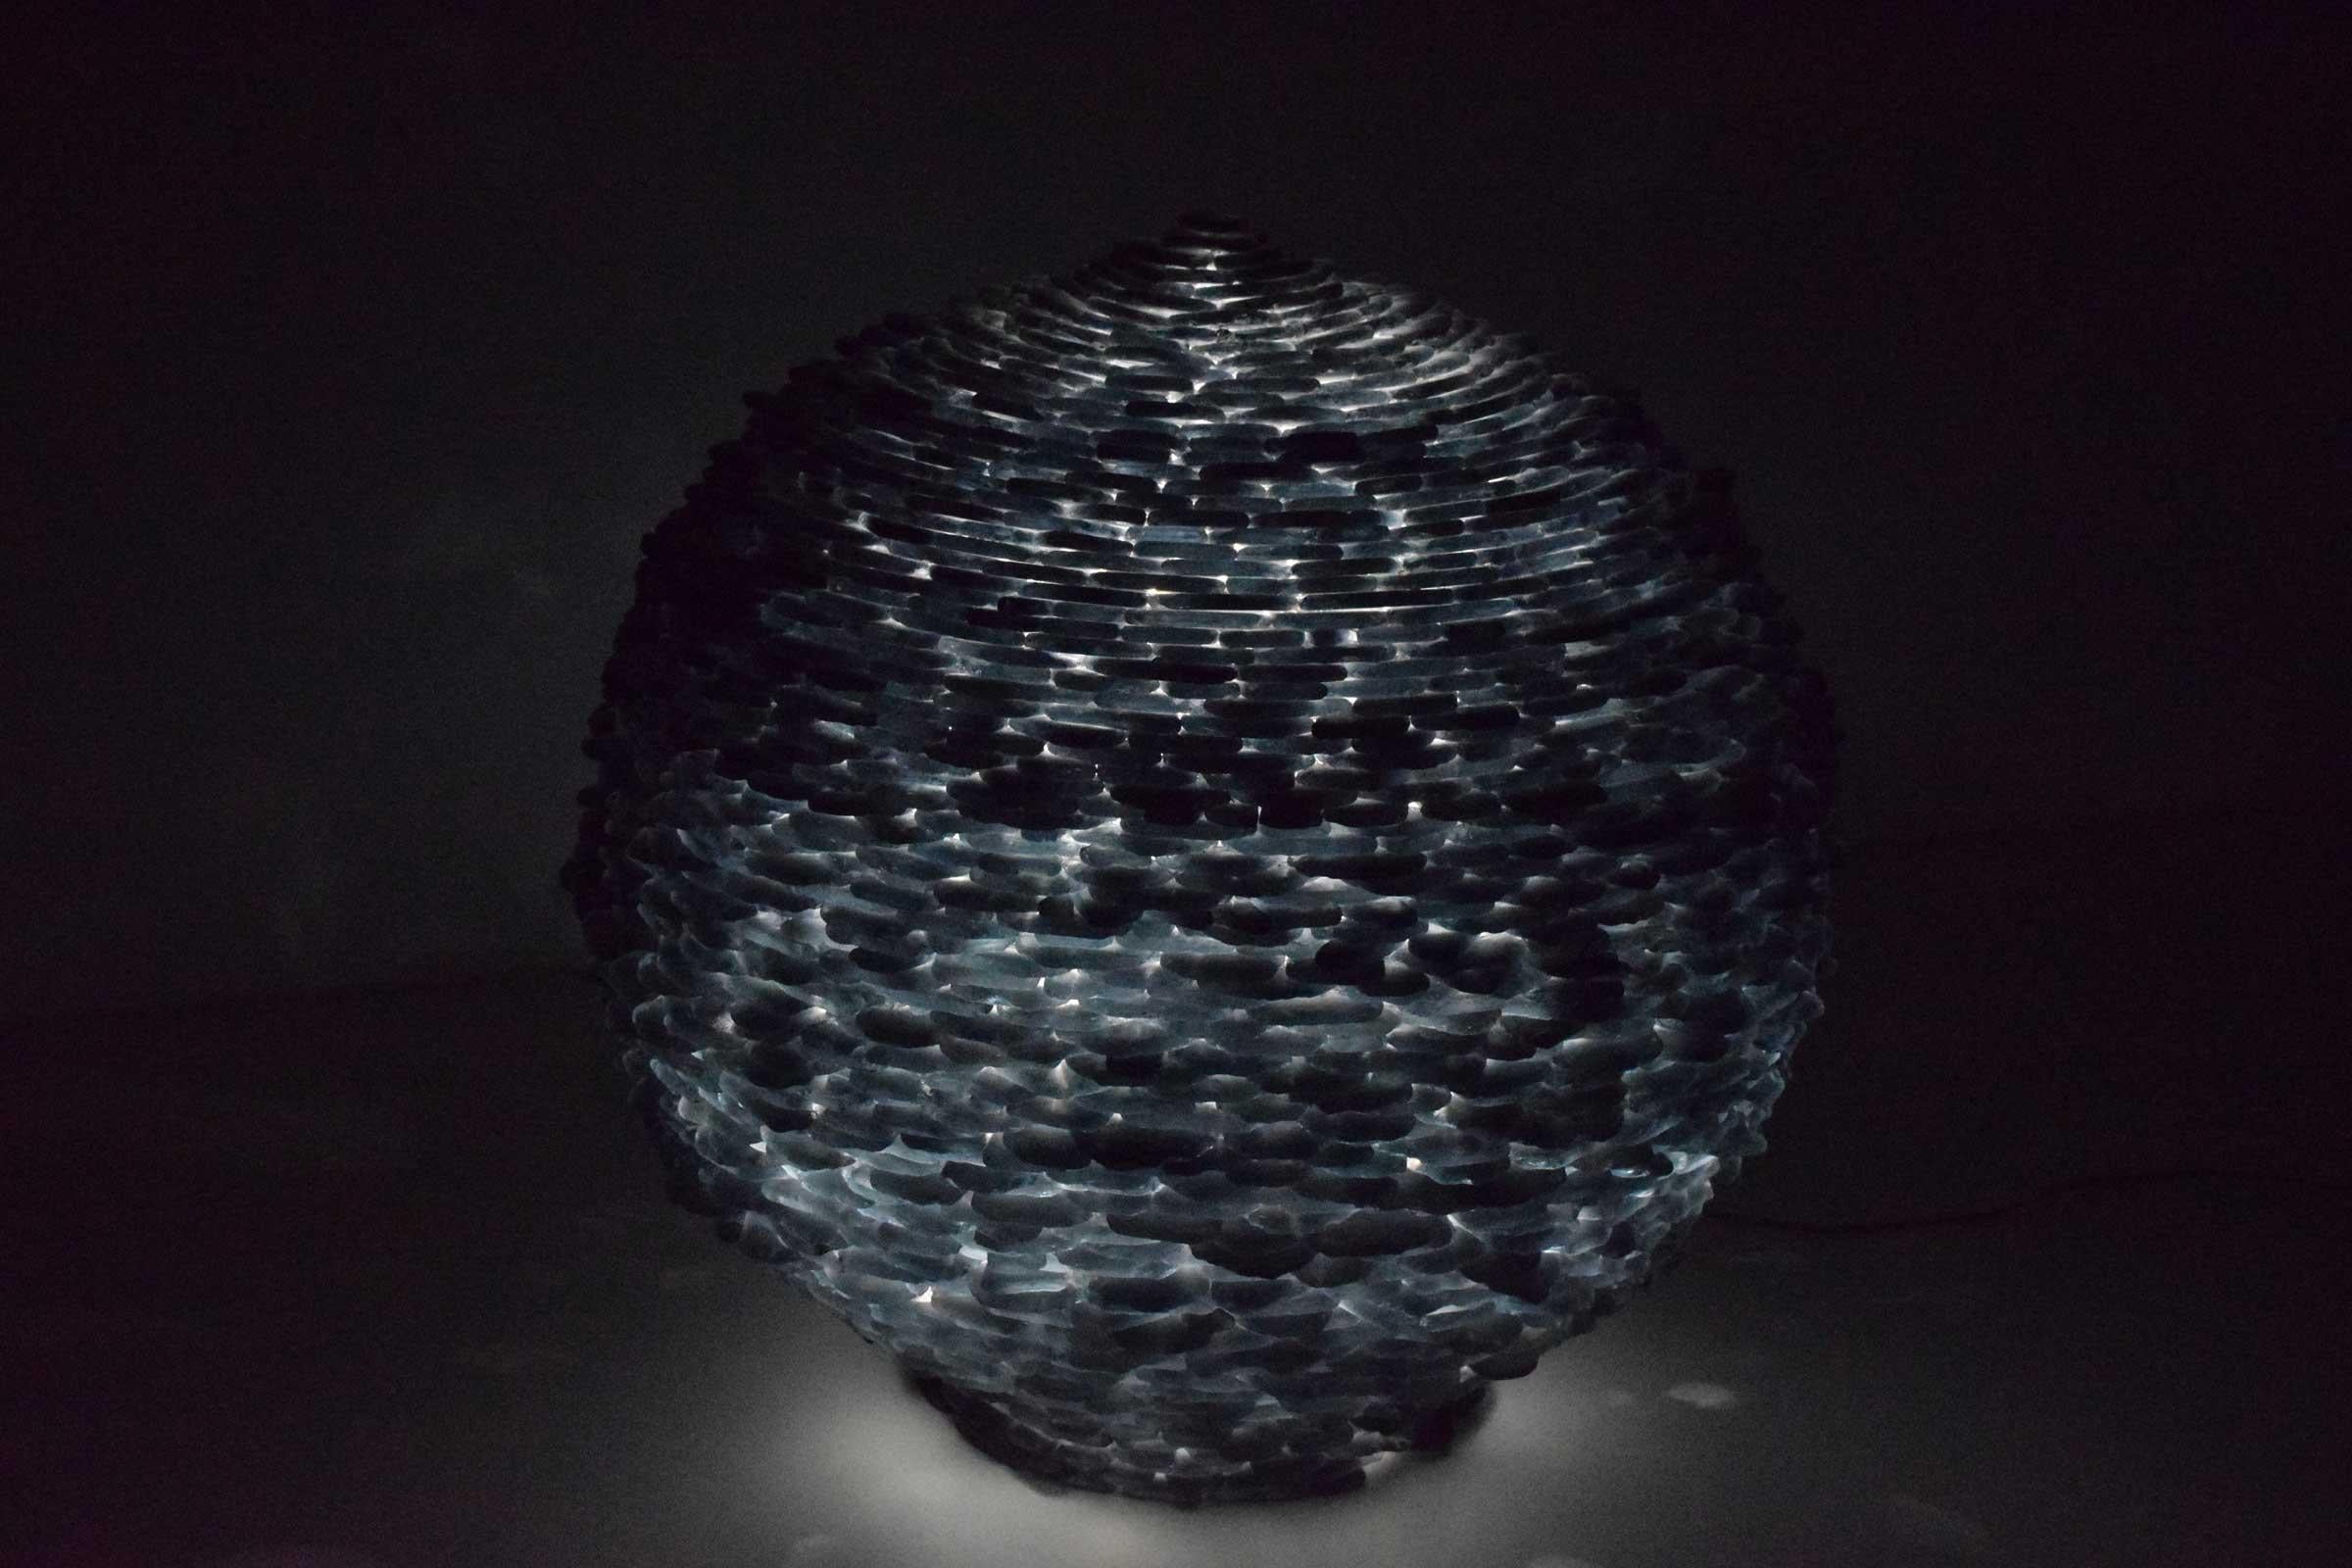 This is a really great lamp. It has hundreds of pieces of cut glass forming a round ball like lamp. Lamp can sit on floor or top of table or pedestal. A true work of art. Especially beautiful when lit at night, a soft, textured glow. In the manner